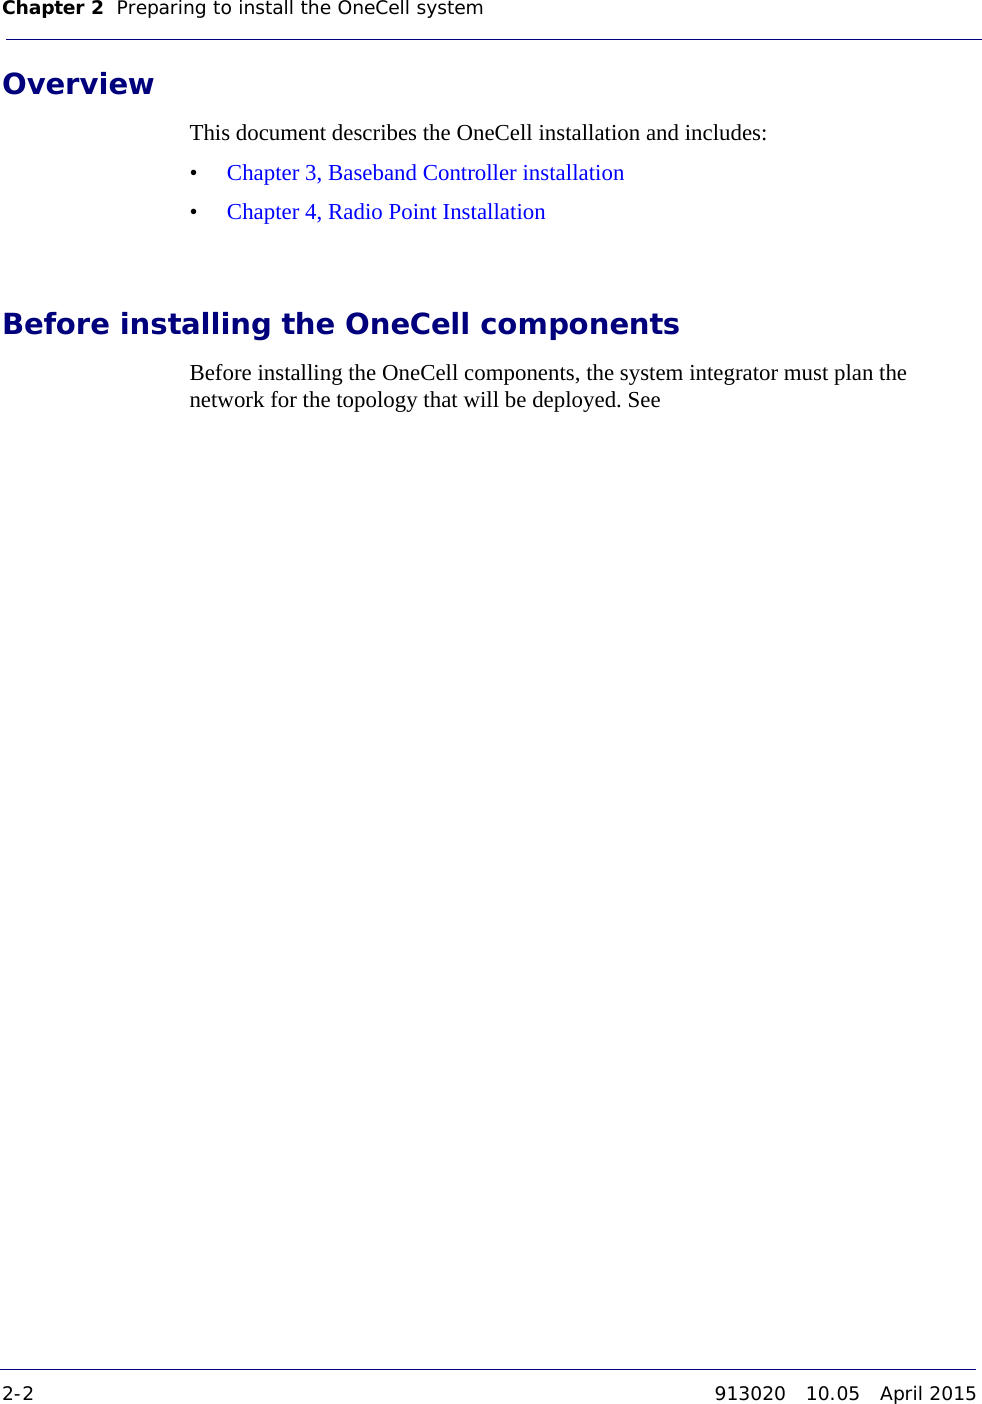 Chapter 2 Preparing to install the OneCell system 2-2 913020 10.05 April 2015DRAFTOverviewThis document describes the OneCell installation and includes: •Chapter 3, Baseband Controller installation•Chapter 4, Radio Point InstallationBefore installing the OneCell componentsBefore installing the OneCell components, the system integrator must plan the network for the topology that will be deployed. See 